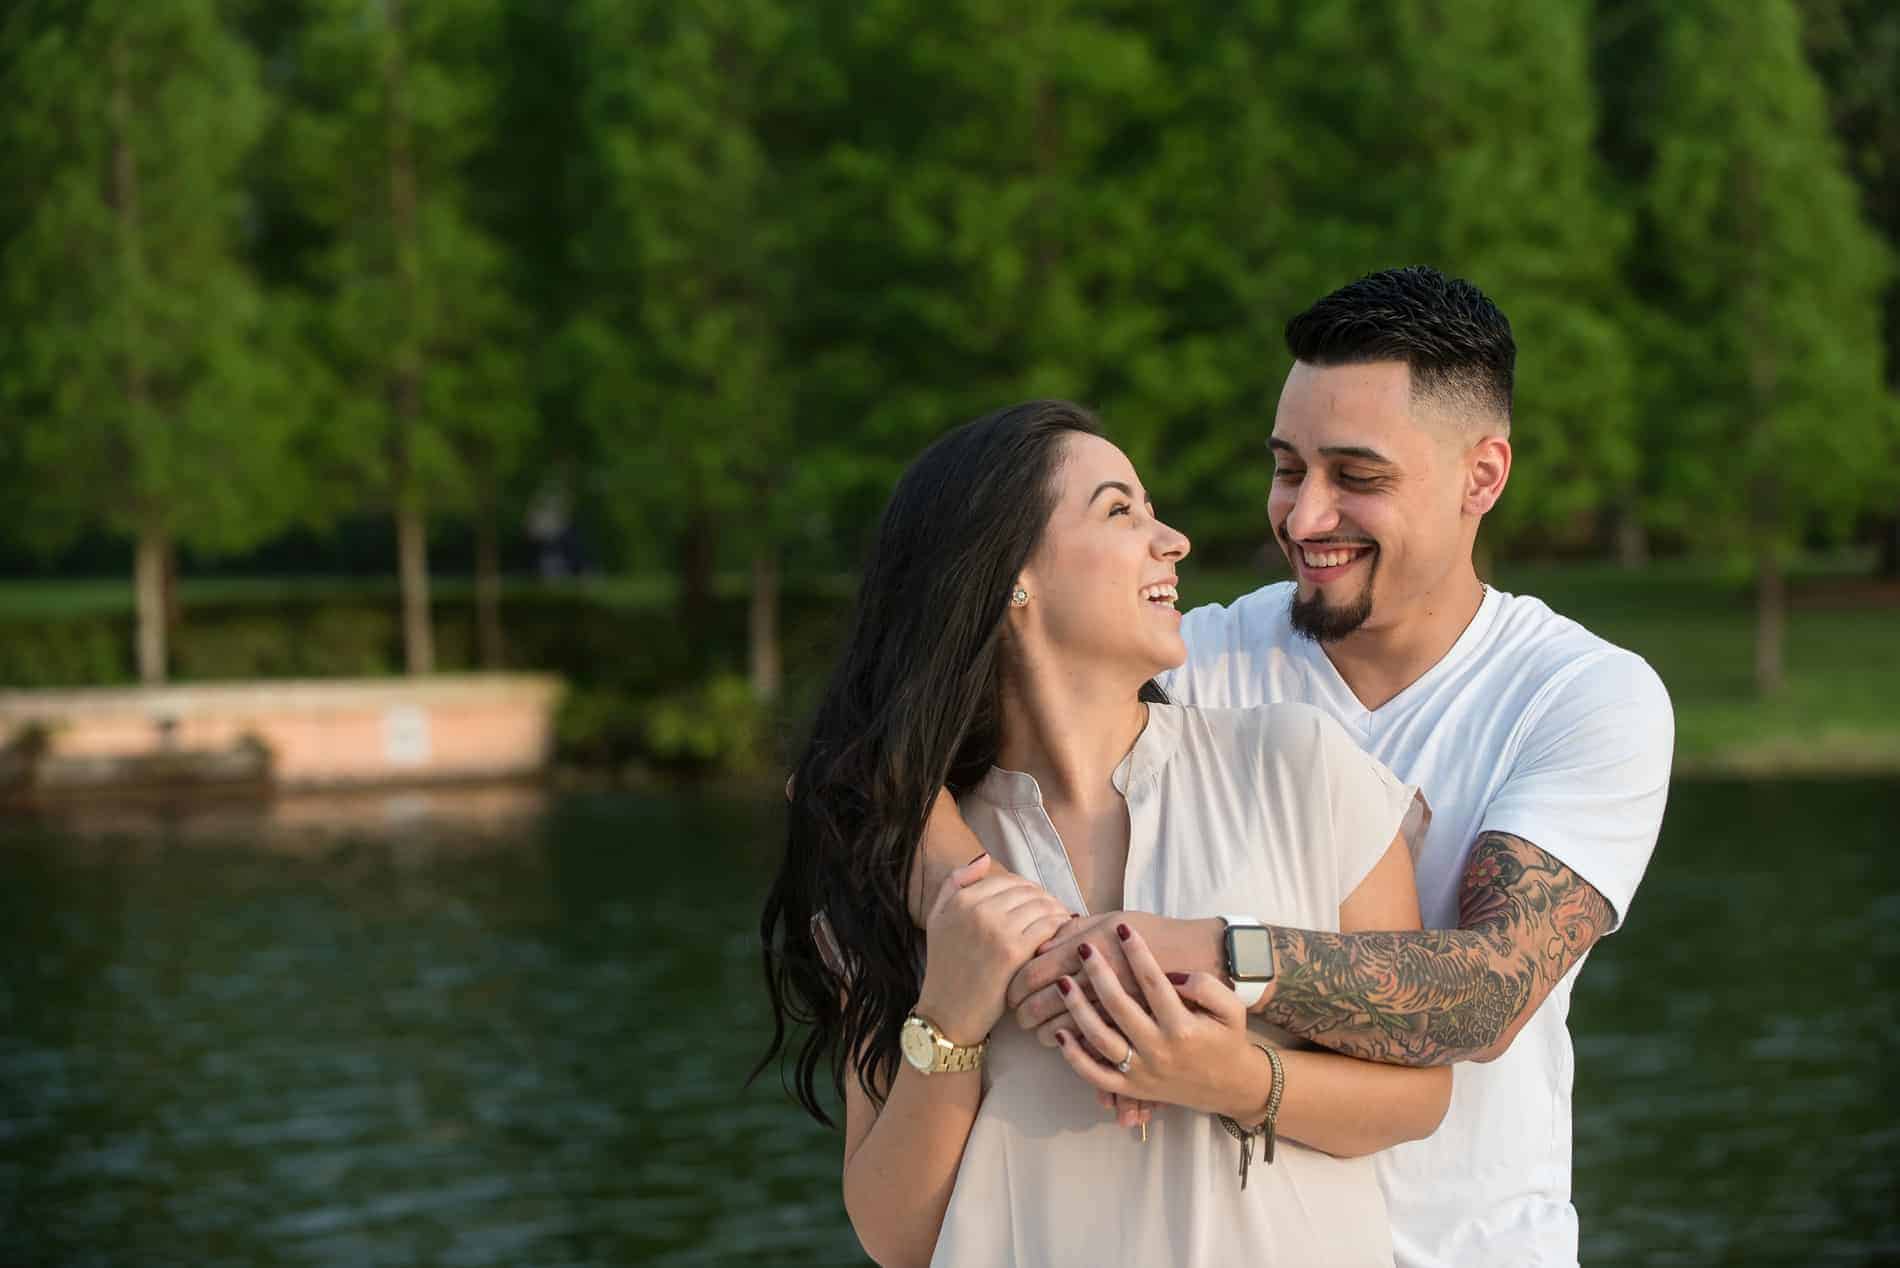 Very Cute Couple during an Engagement Session with their Orlando Wedding Photographers